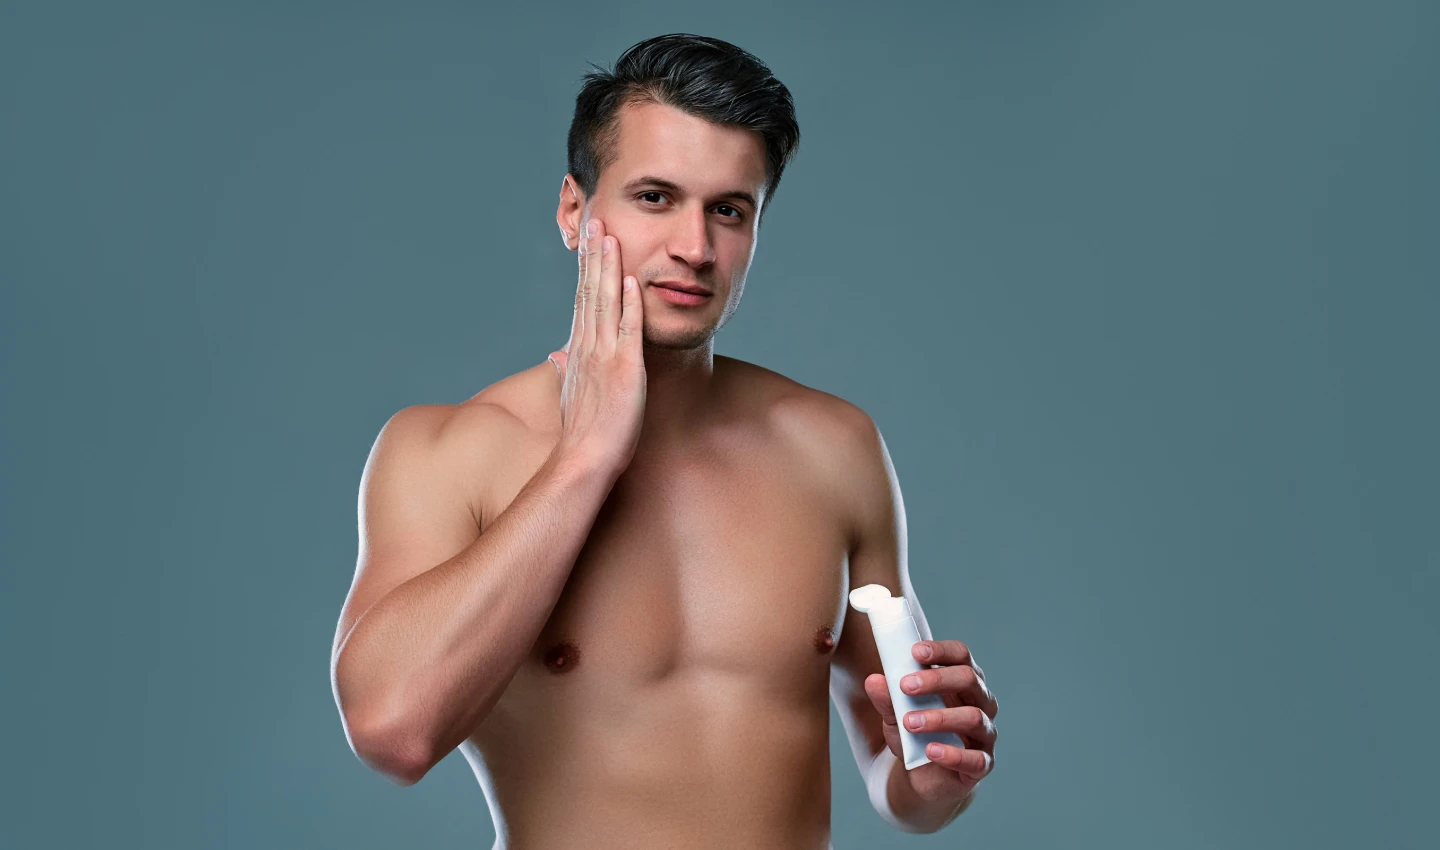 Men's Body Care for Sensitive Skin - An image of a well-shaped young man looking at the camera and touching his face. The man's healthy and glowing skin emphasizes the importance of taking care of your skin, especially if you have sensitive skin.